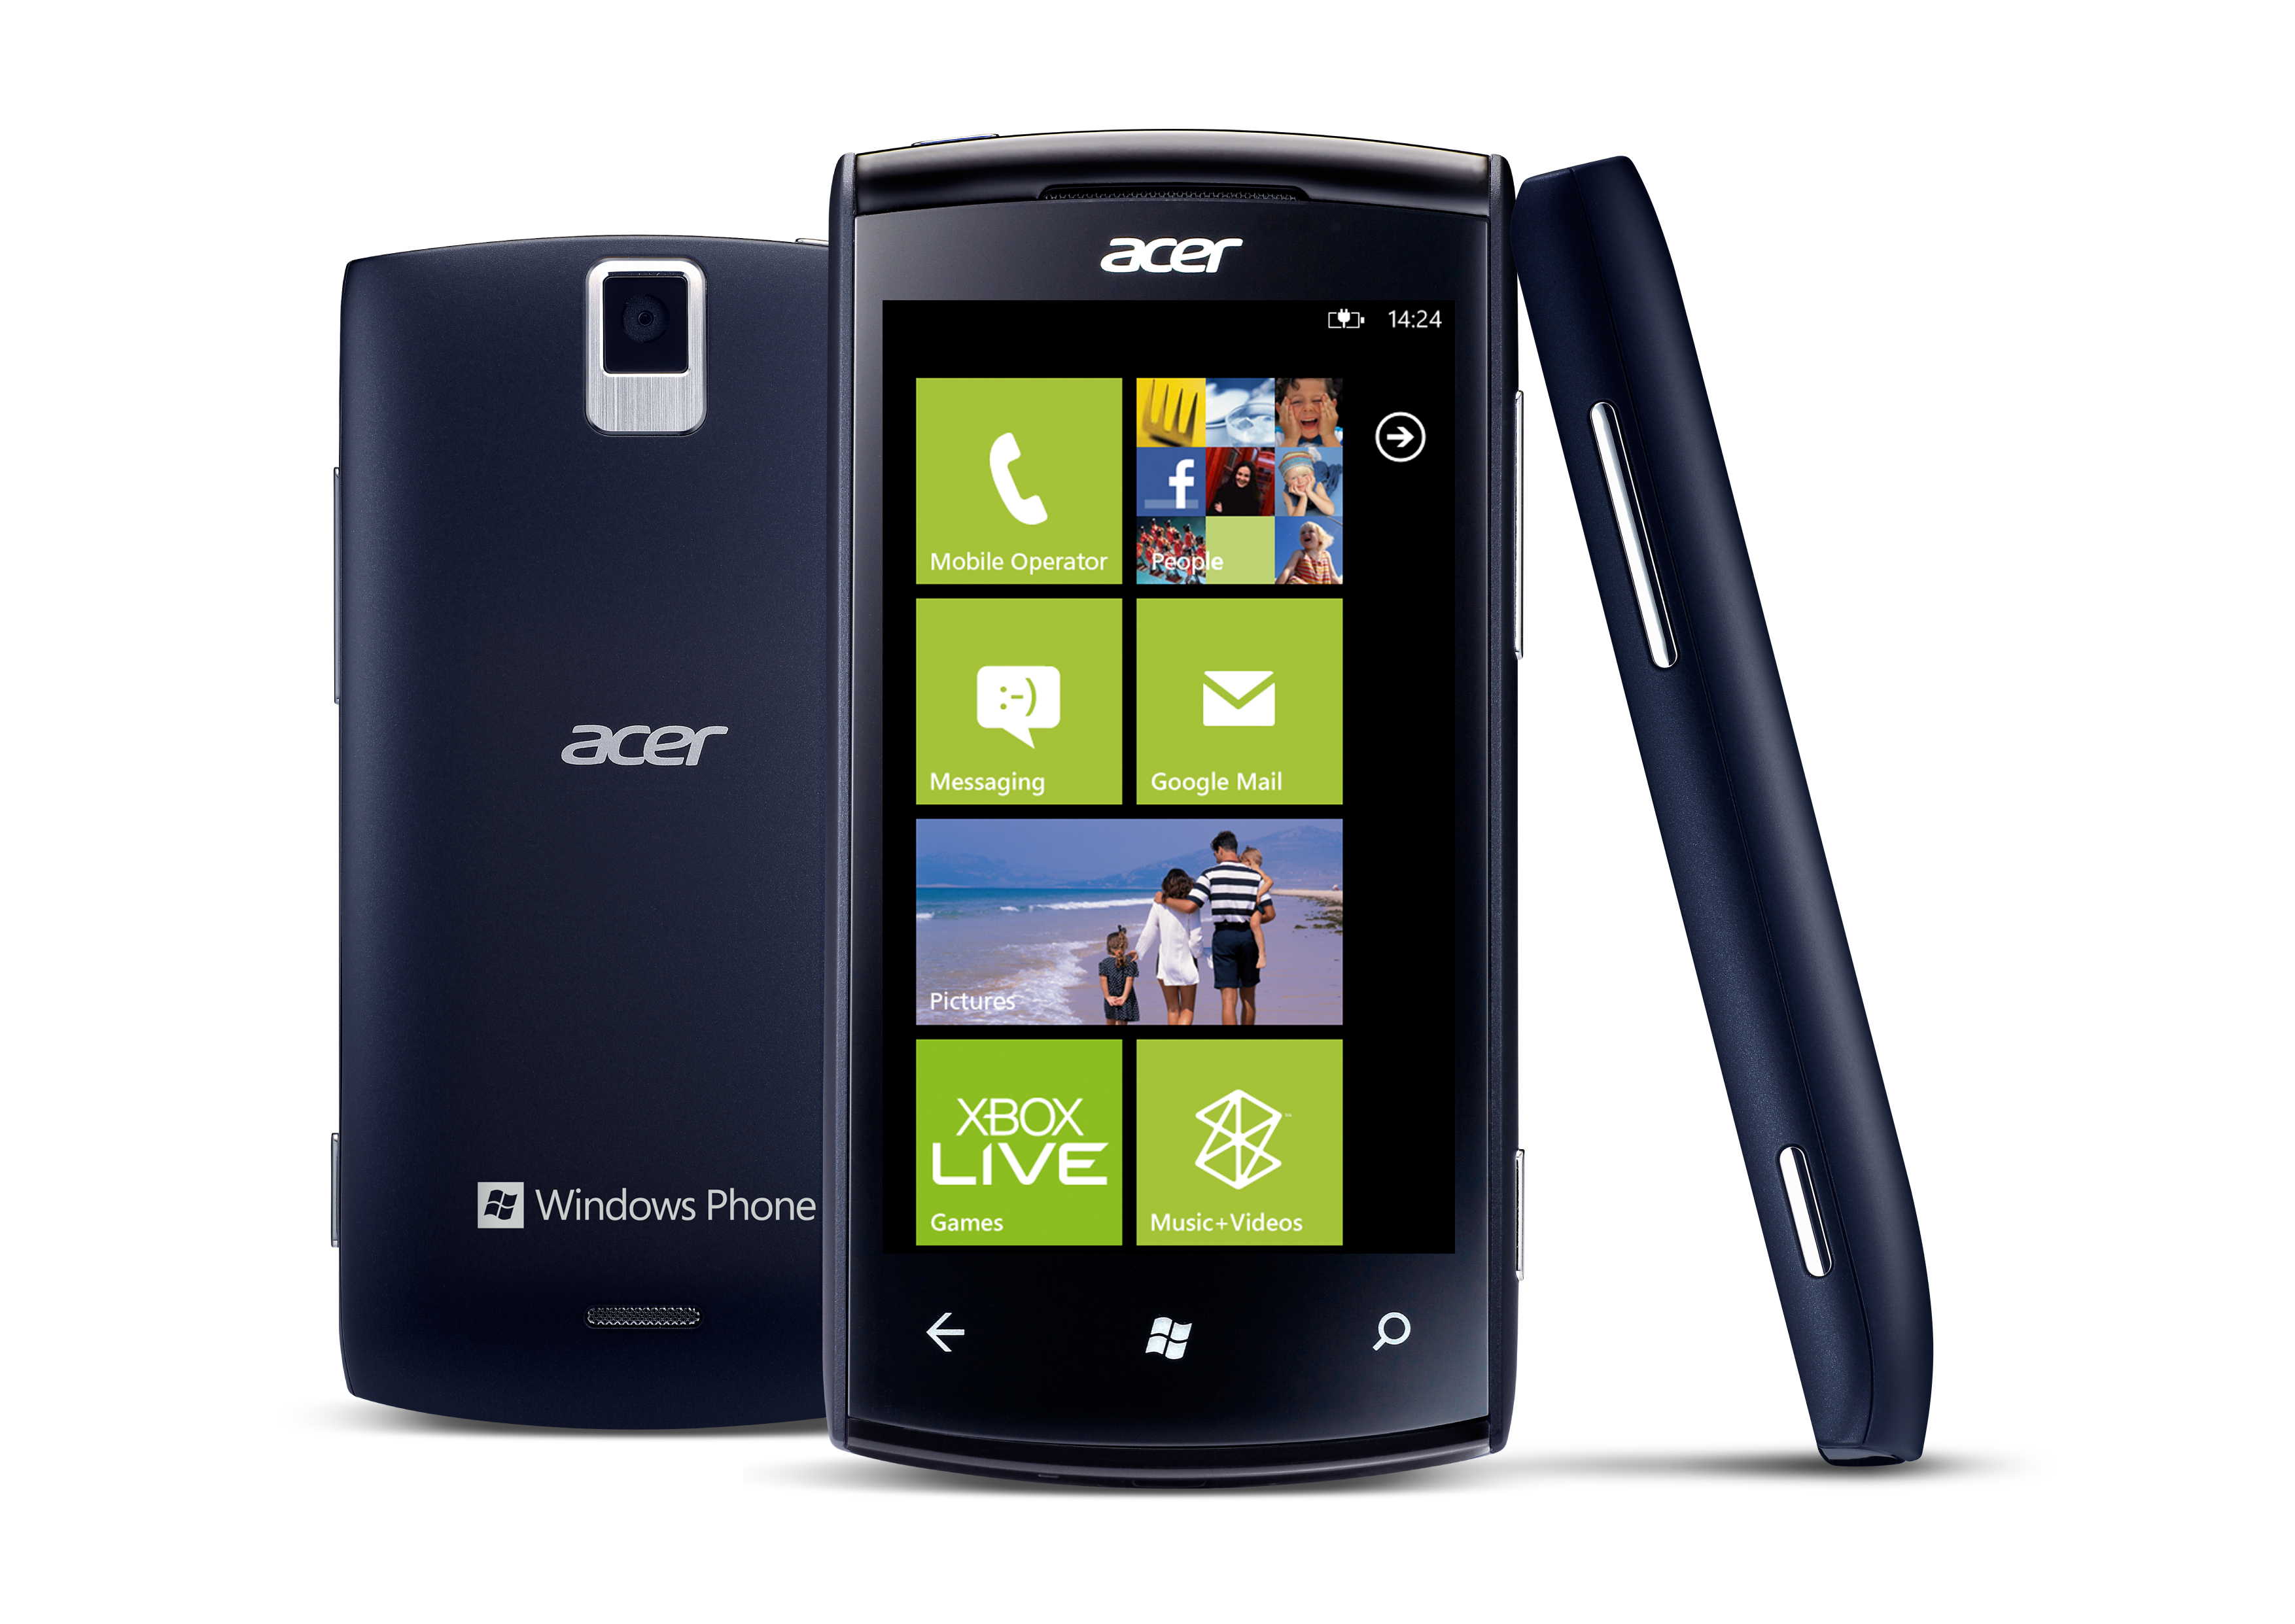 Acer M310